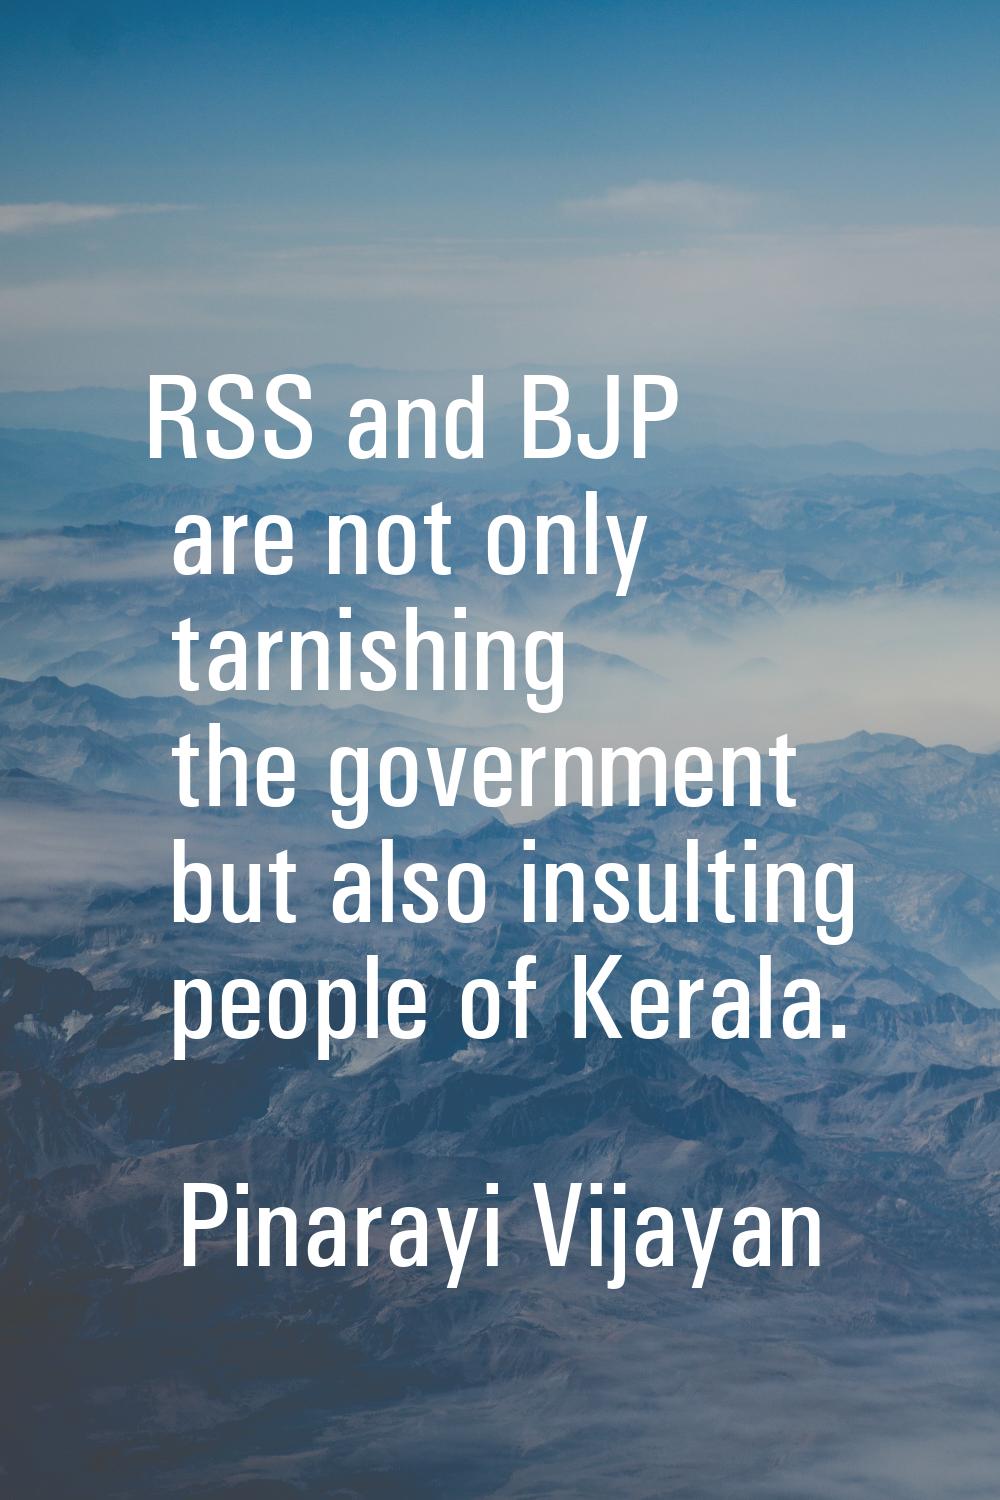 RSS and BJP are not only tarnishing the government but also insulting people of Kerala.